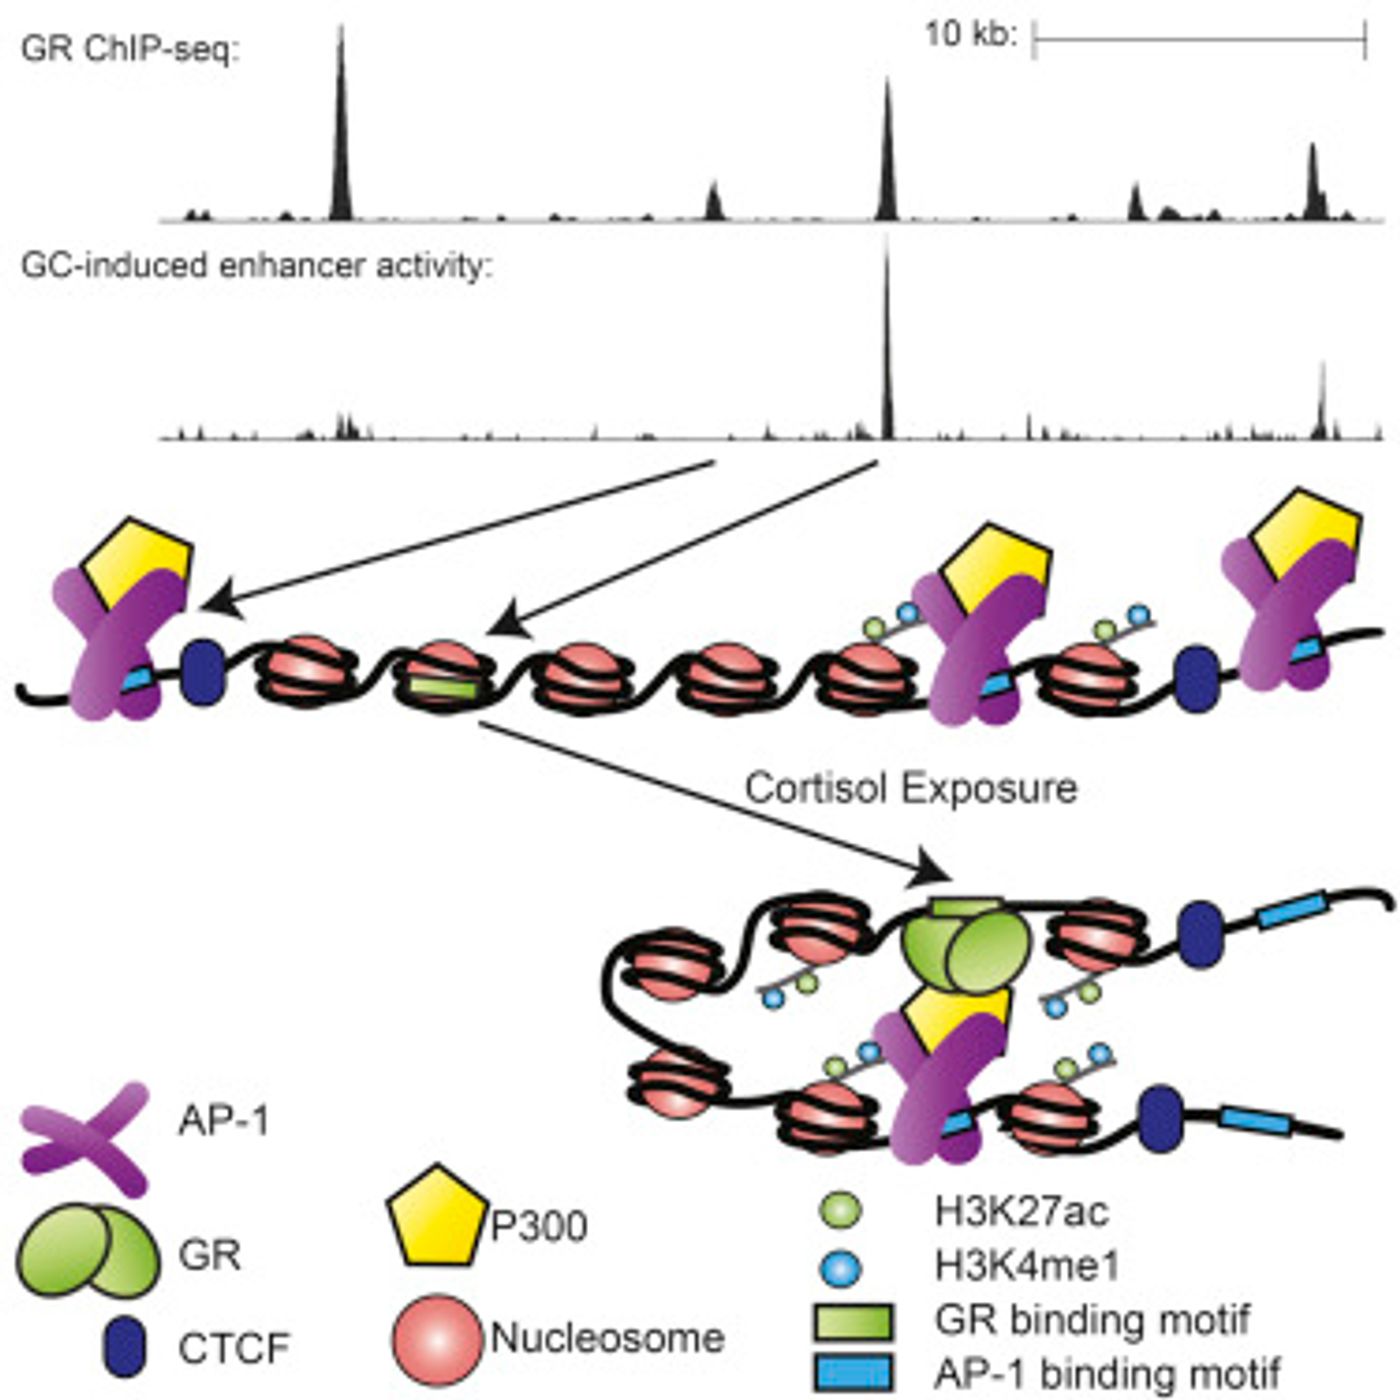 Direct glucocorticoid (GC) receptor binding sites (GBSs) encode GC-induced enhancers. Non-GC-induced GBSs cluster around and interact with direct GBSs. These interactions amplify the activity of directly bound GC-inducible enhancers /Credit: Cell Vockley et al